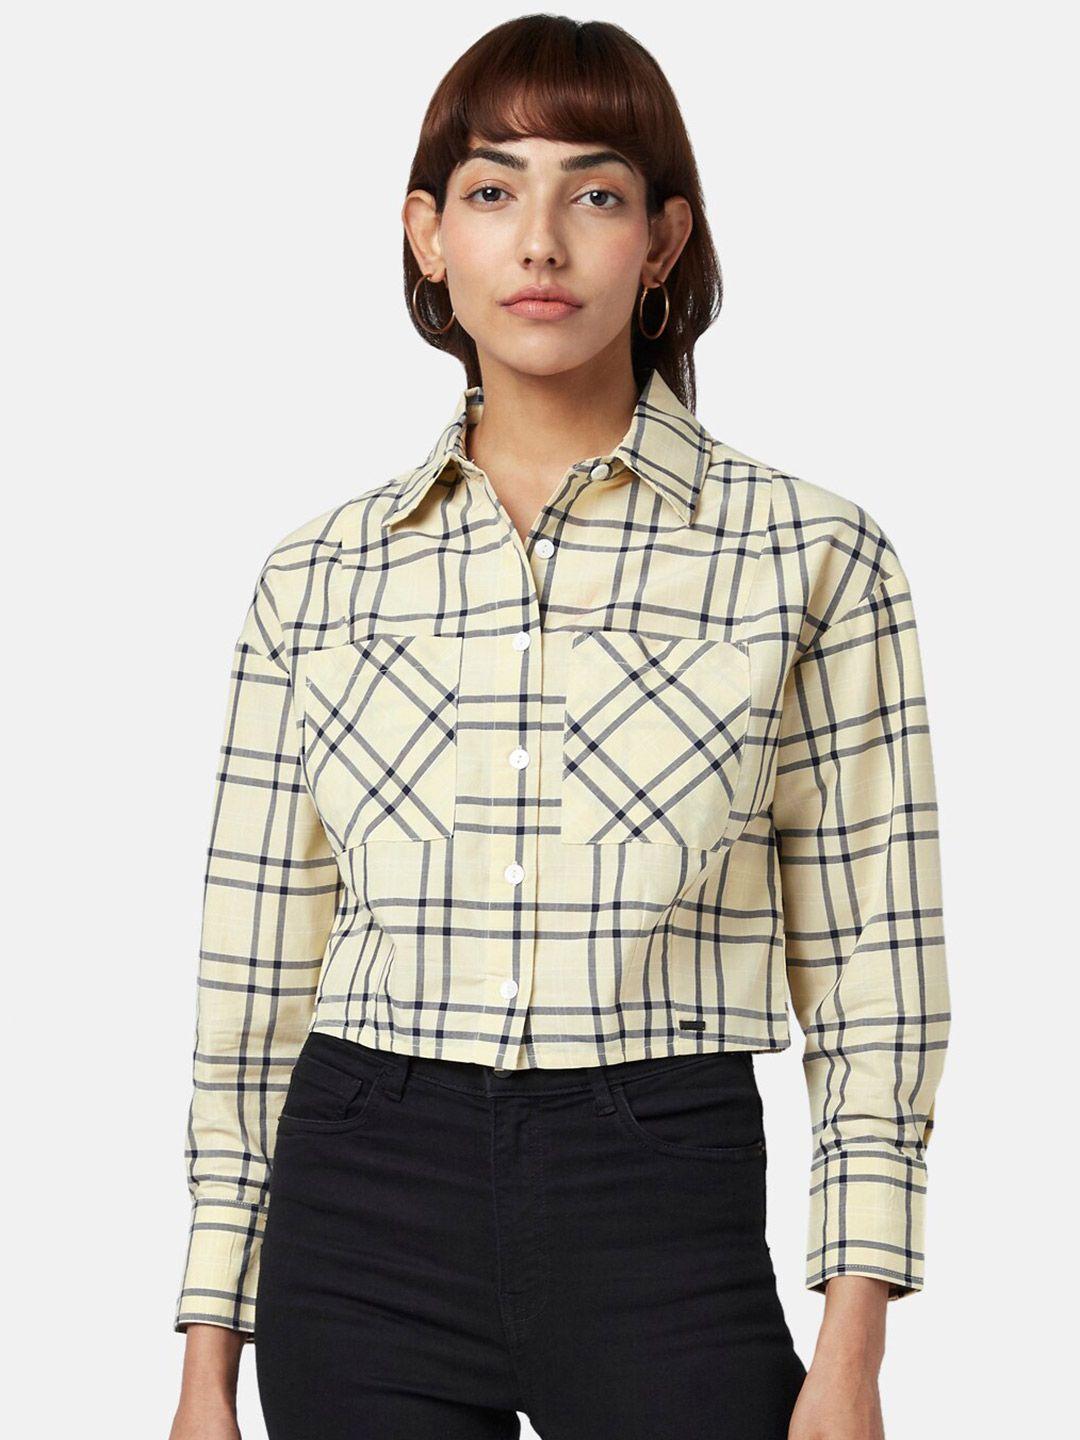 sf-jeans-by-pantaloons-women-off-white-&-yellow-tartan-checked-cotton-casual-shirt